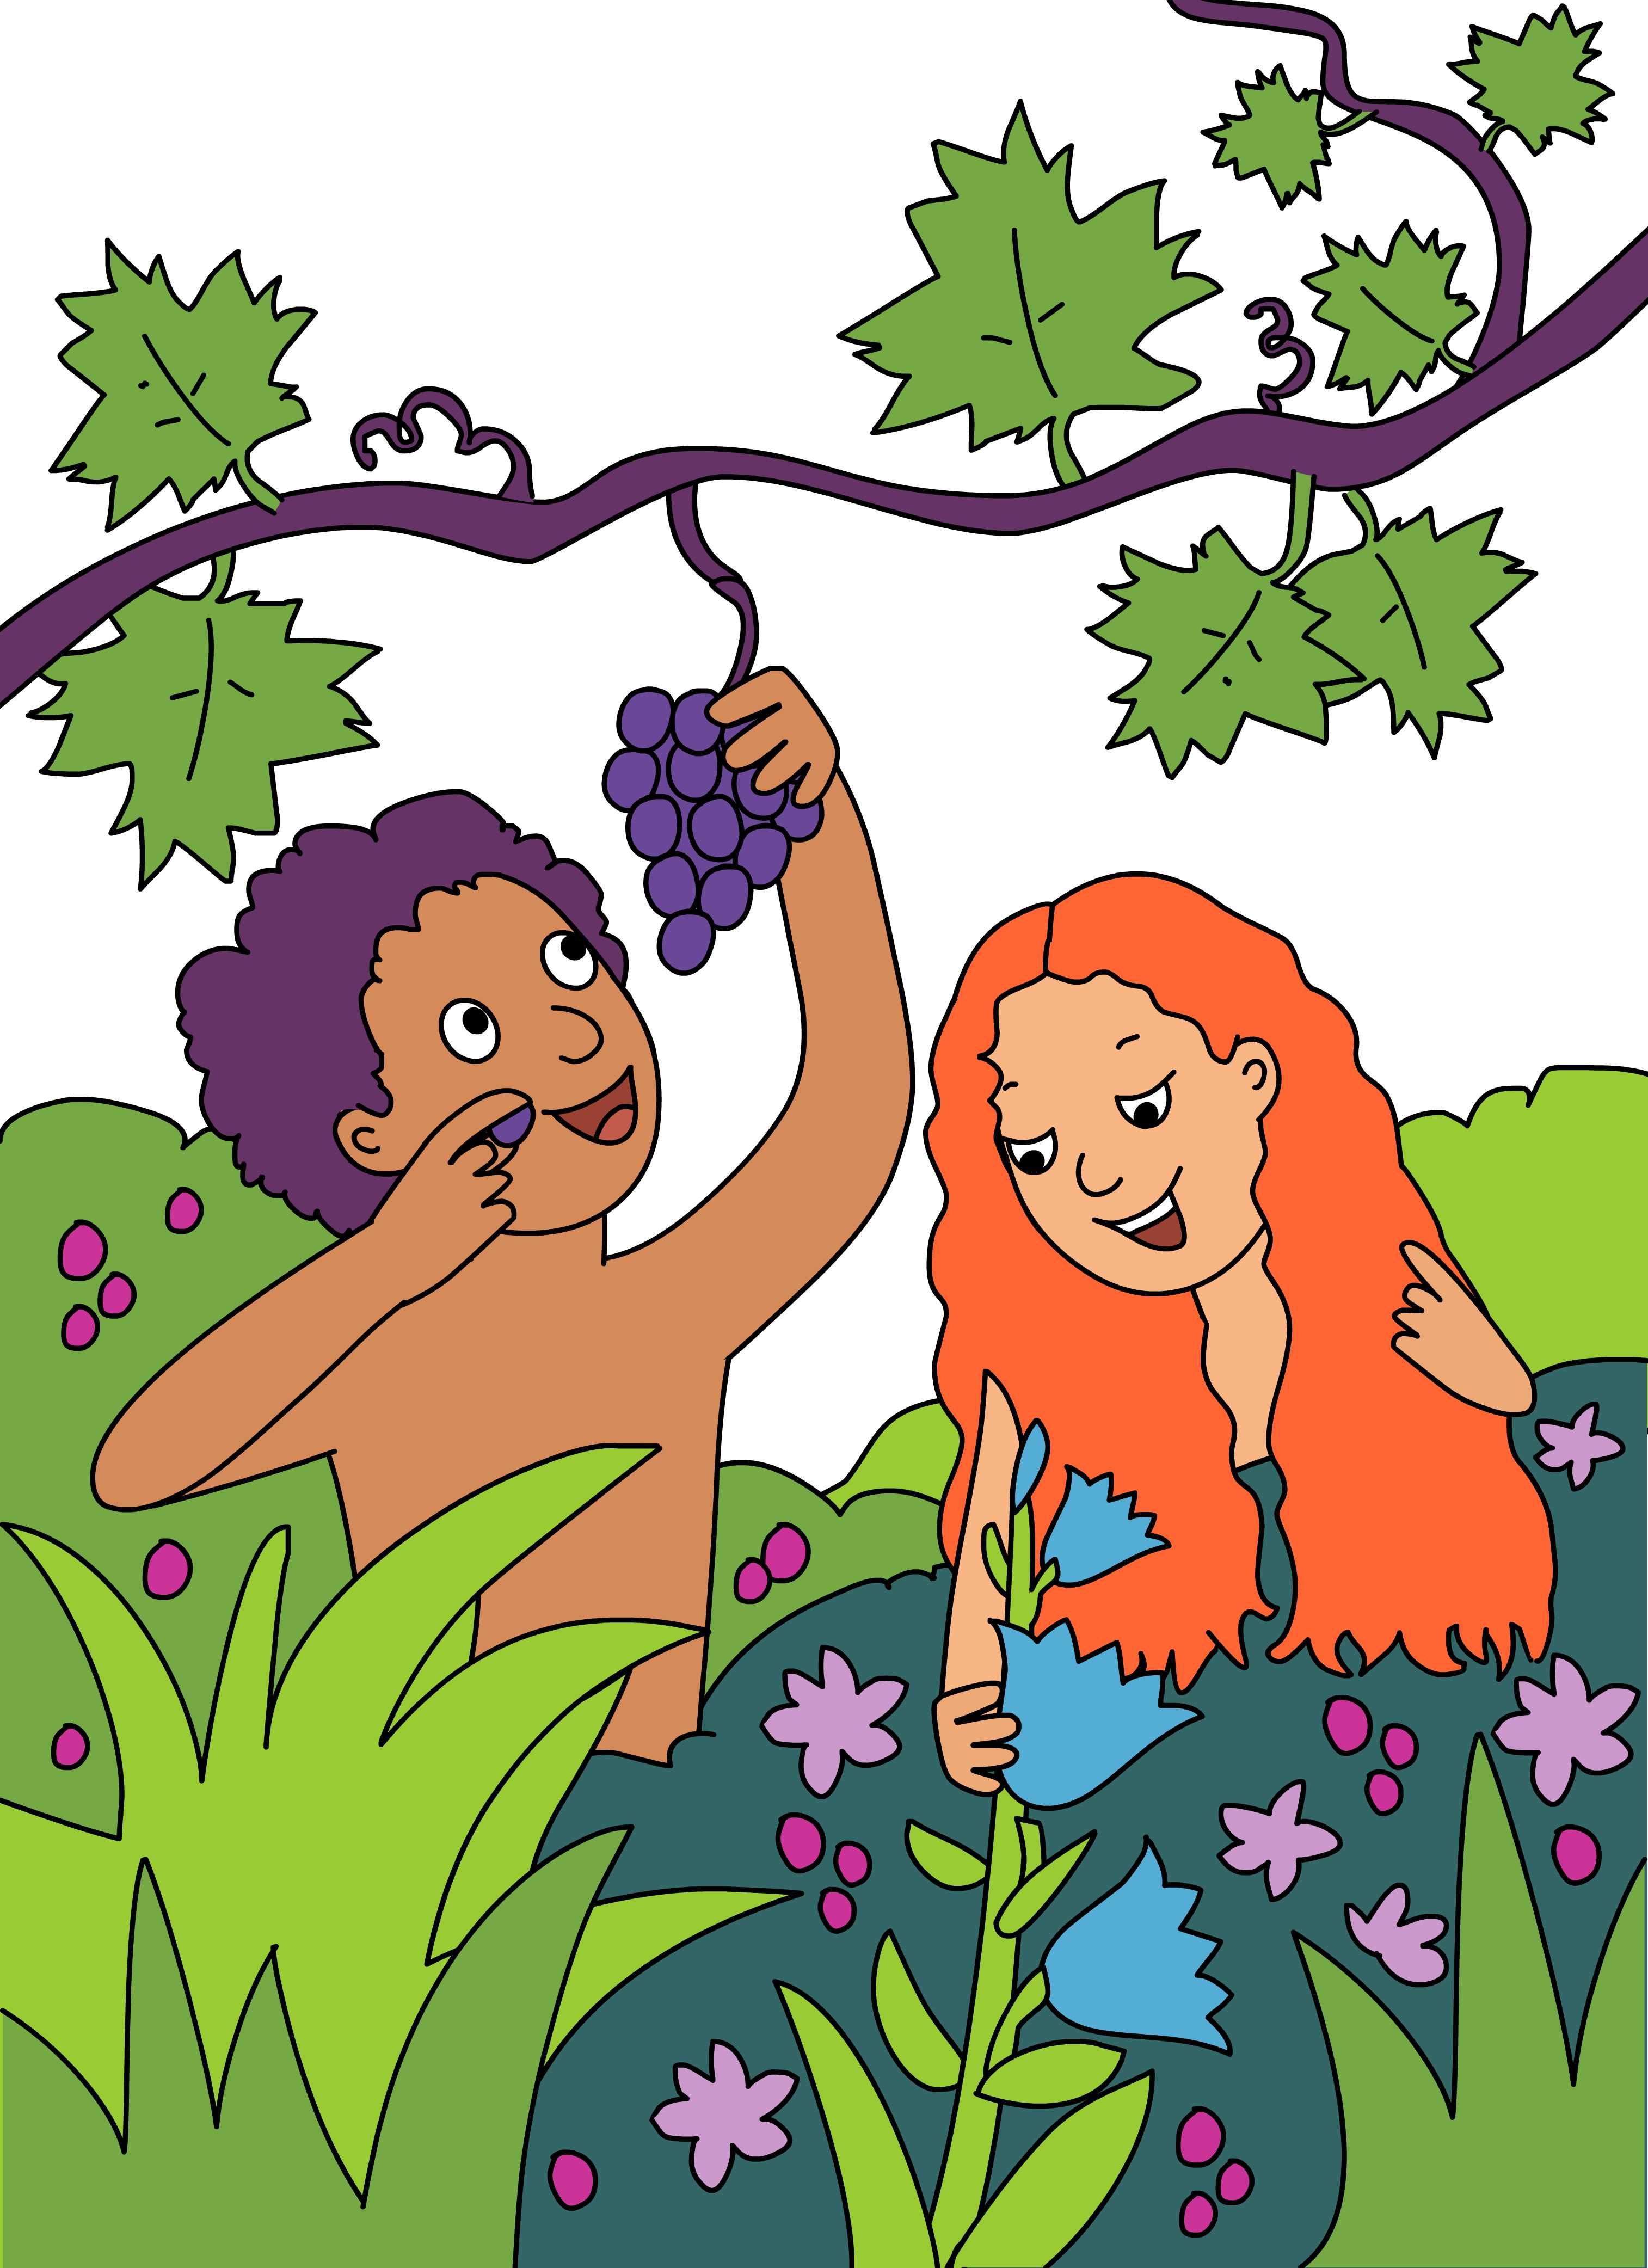 Adam and Eve | 2 of 4 In The Beginning Series - ClipArt Best - ClipArt Best